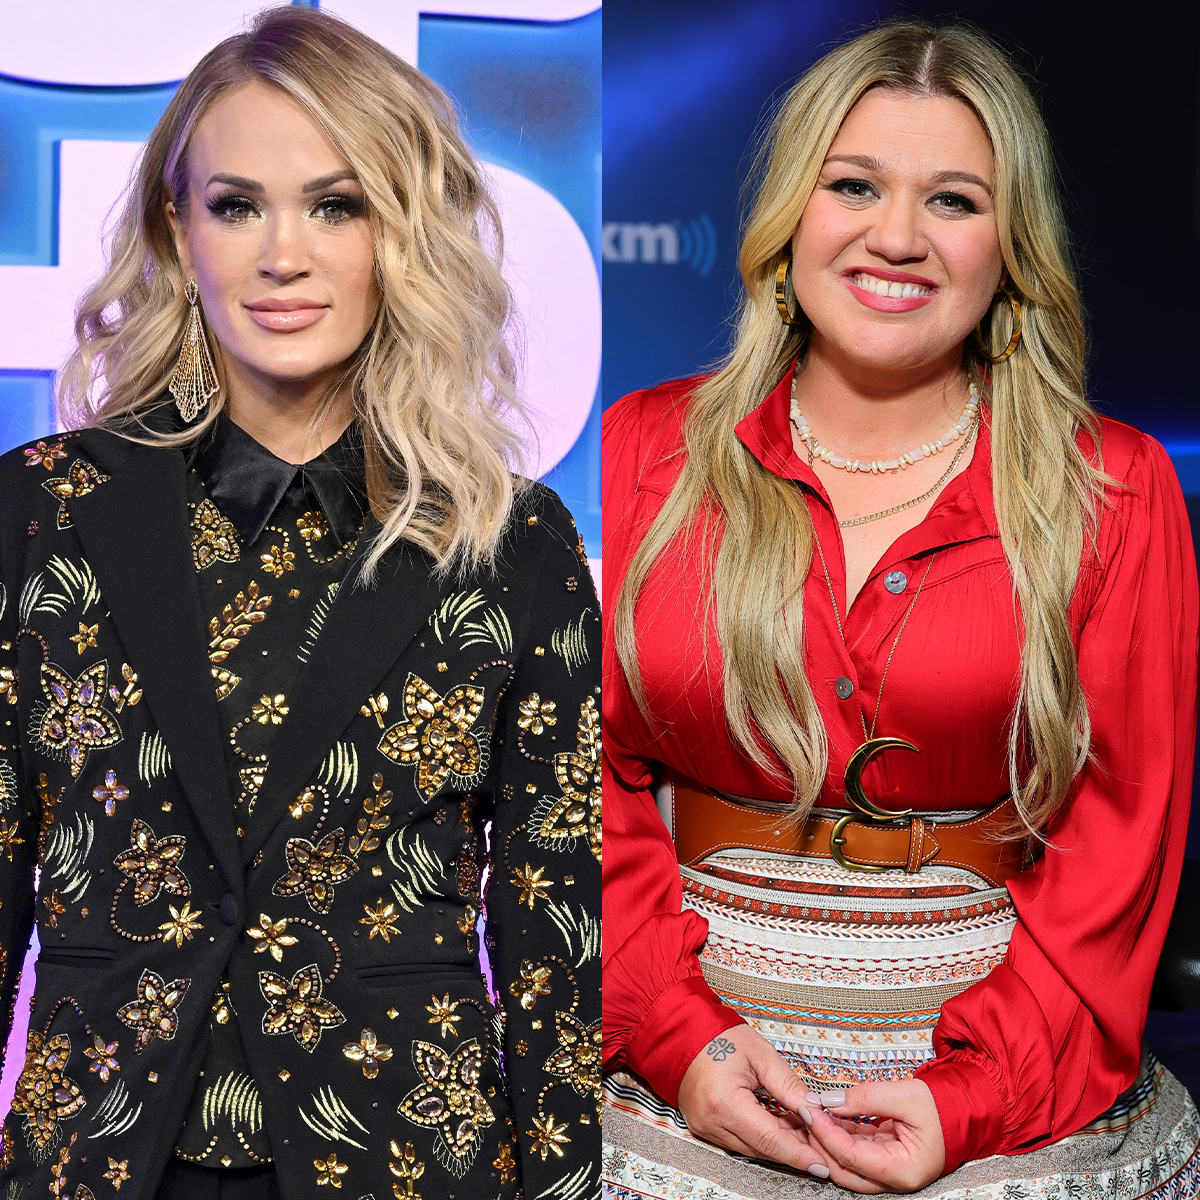 https://akns-images.eonline.com/eol_images/Entire_Site/2023528/rs_1200x1200-230628075400-1200-Carrie_Underwood-Kelly_Clarkson-gj.jpg?fit=around%7C1080:1080&output-quality=90&crop=1080:1080;center,top